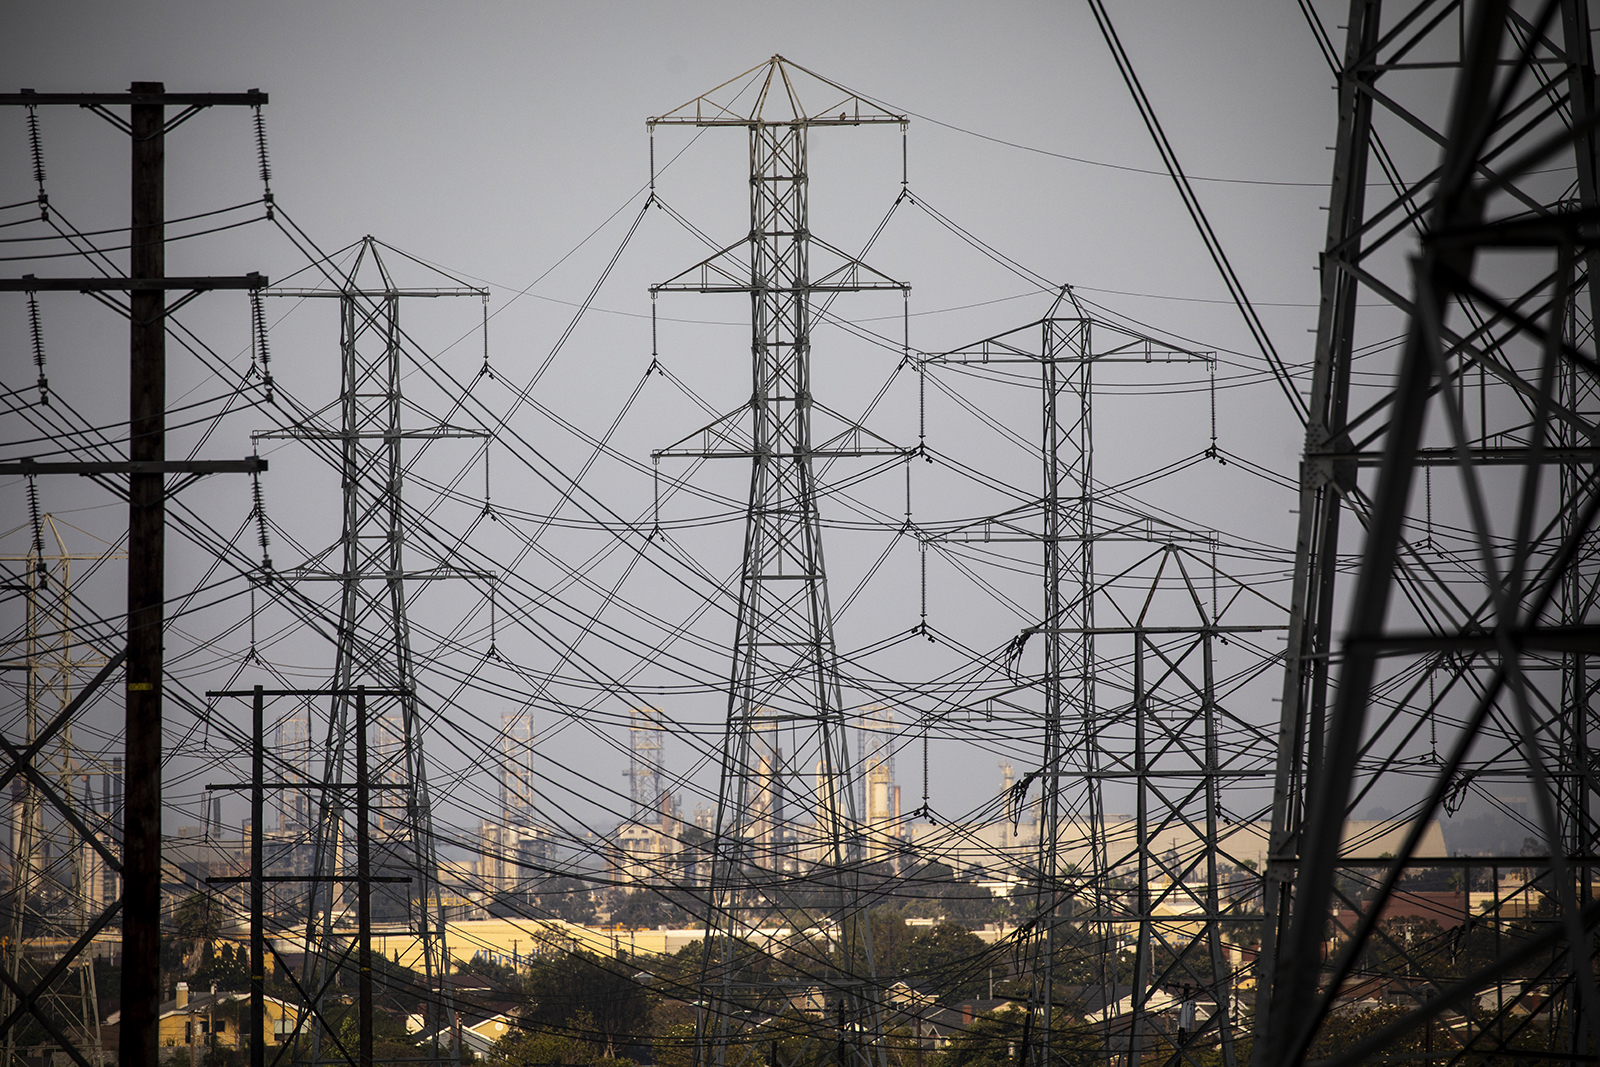 to lower energy costs, california wants to tie bills to income. that plan is making enemies